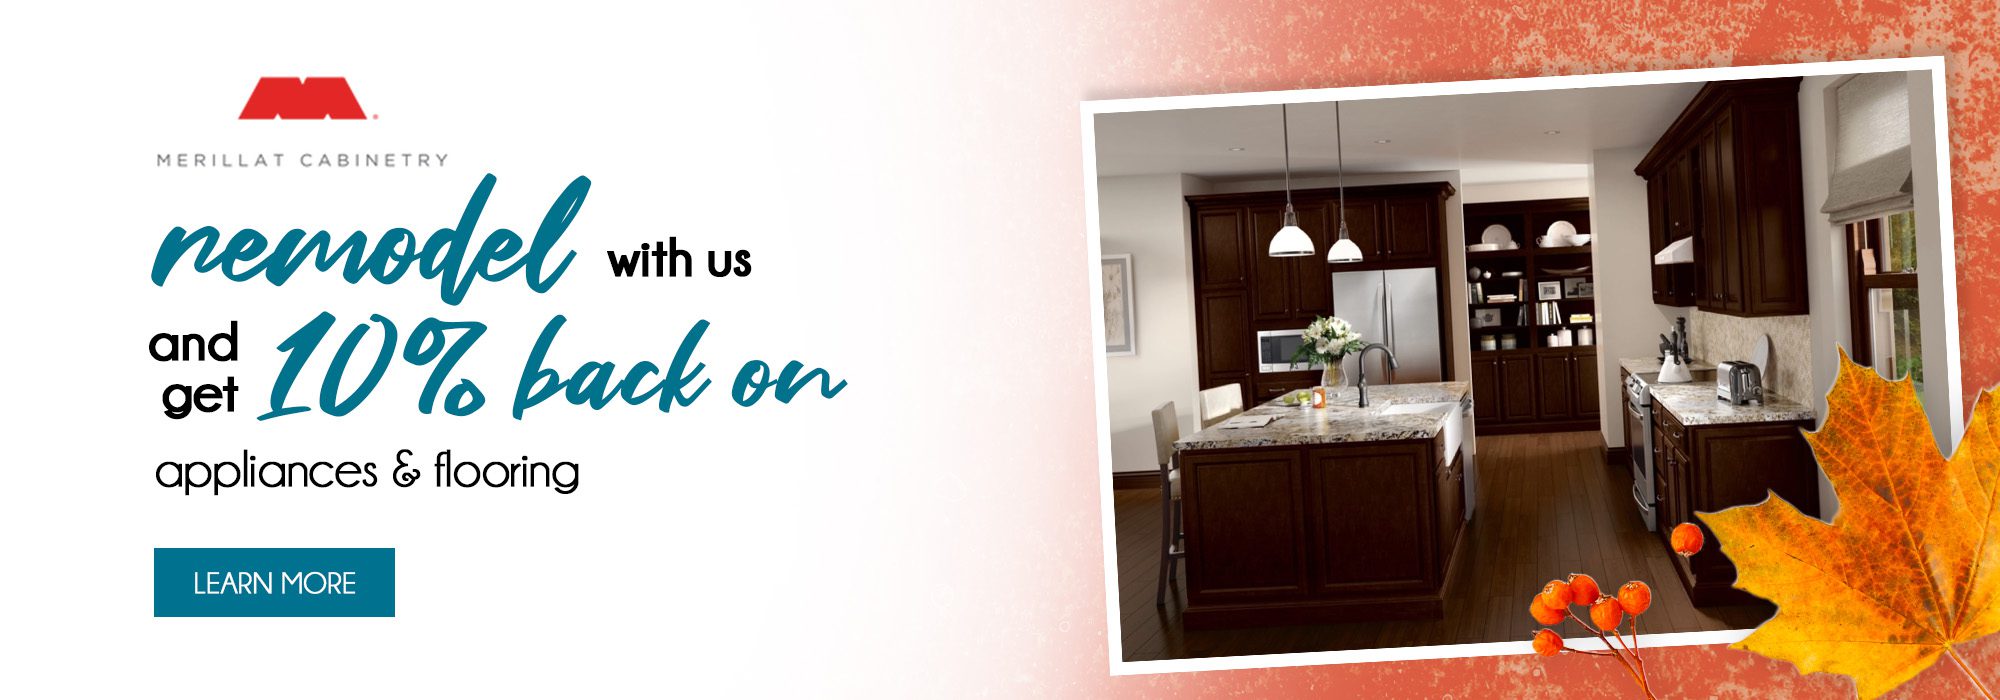 Remodel with us and get 10% back on appliances and flooring